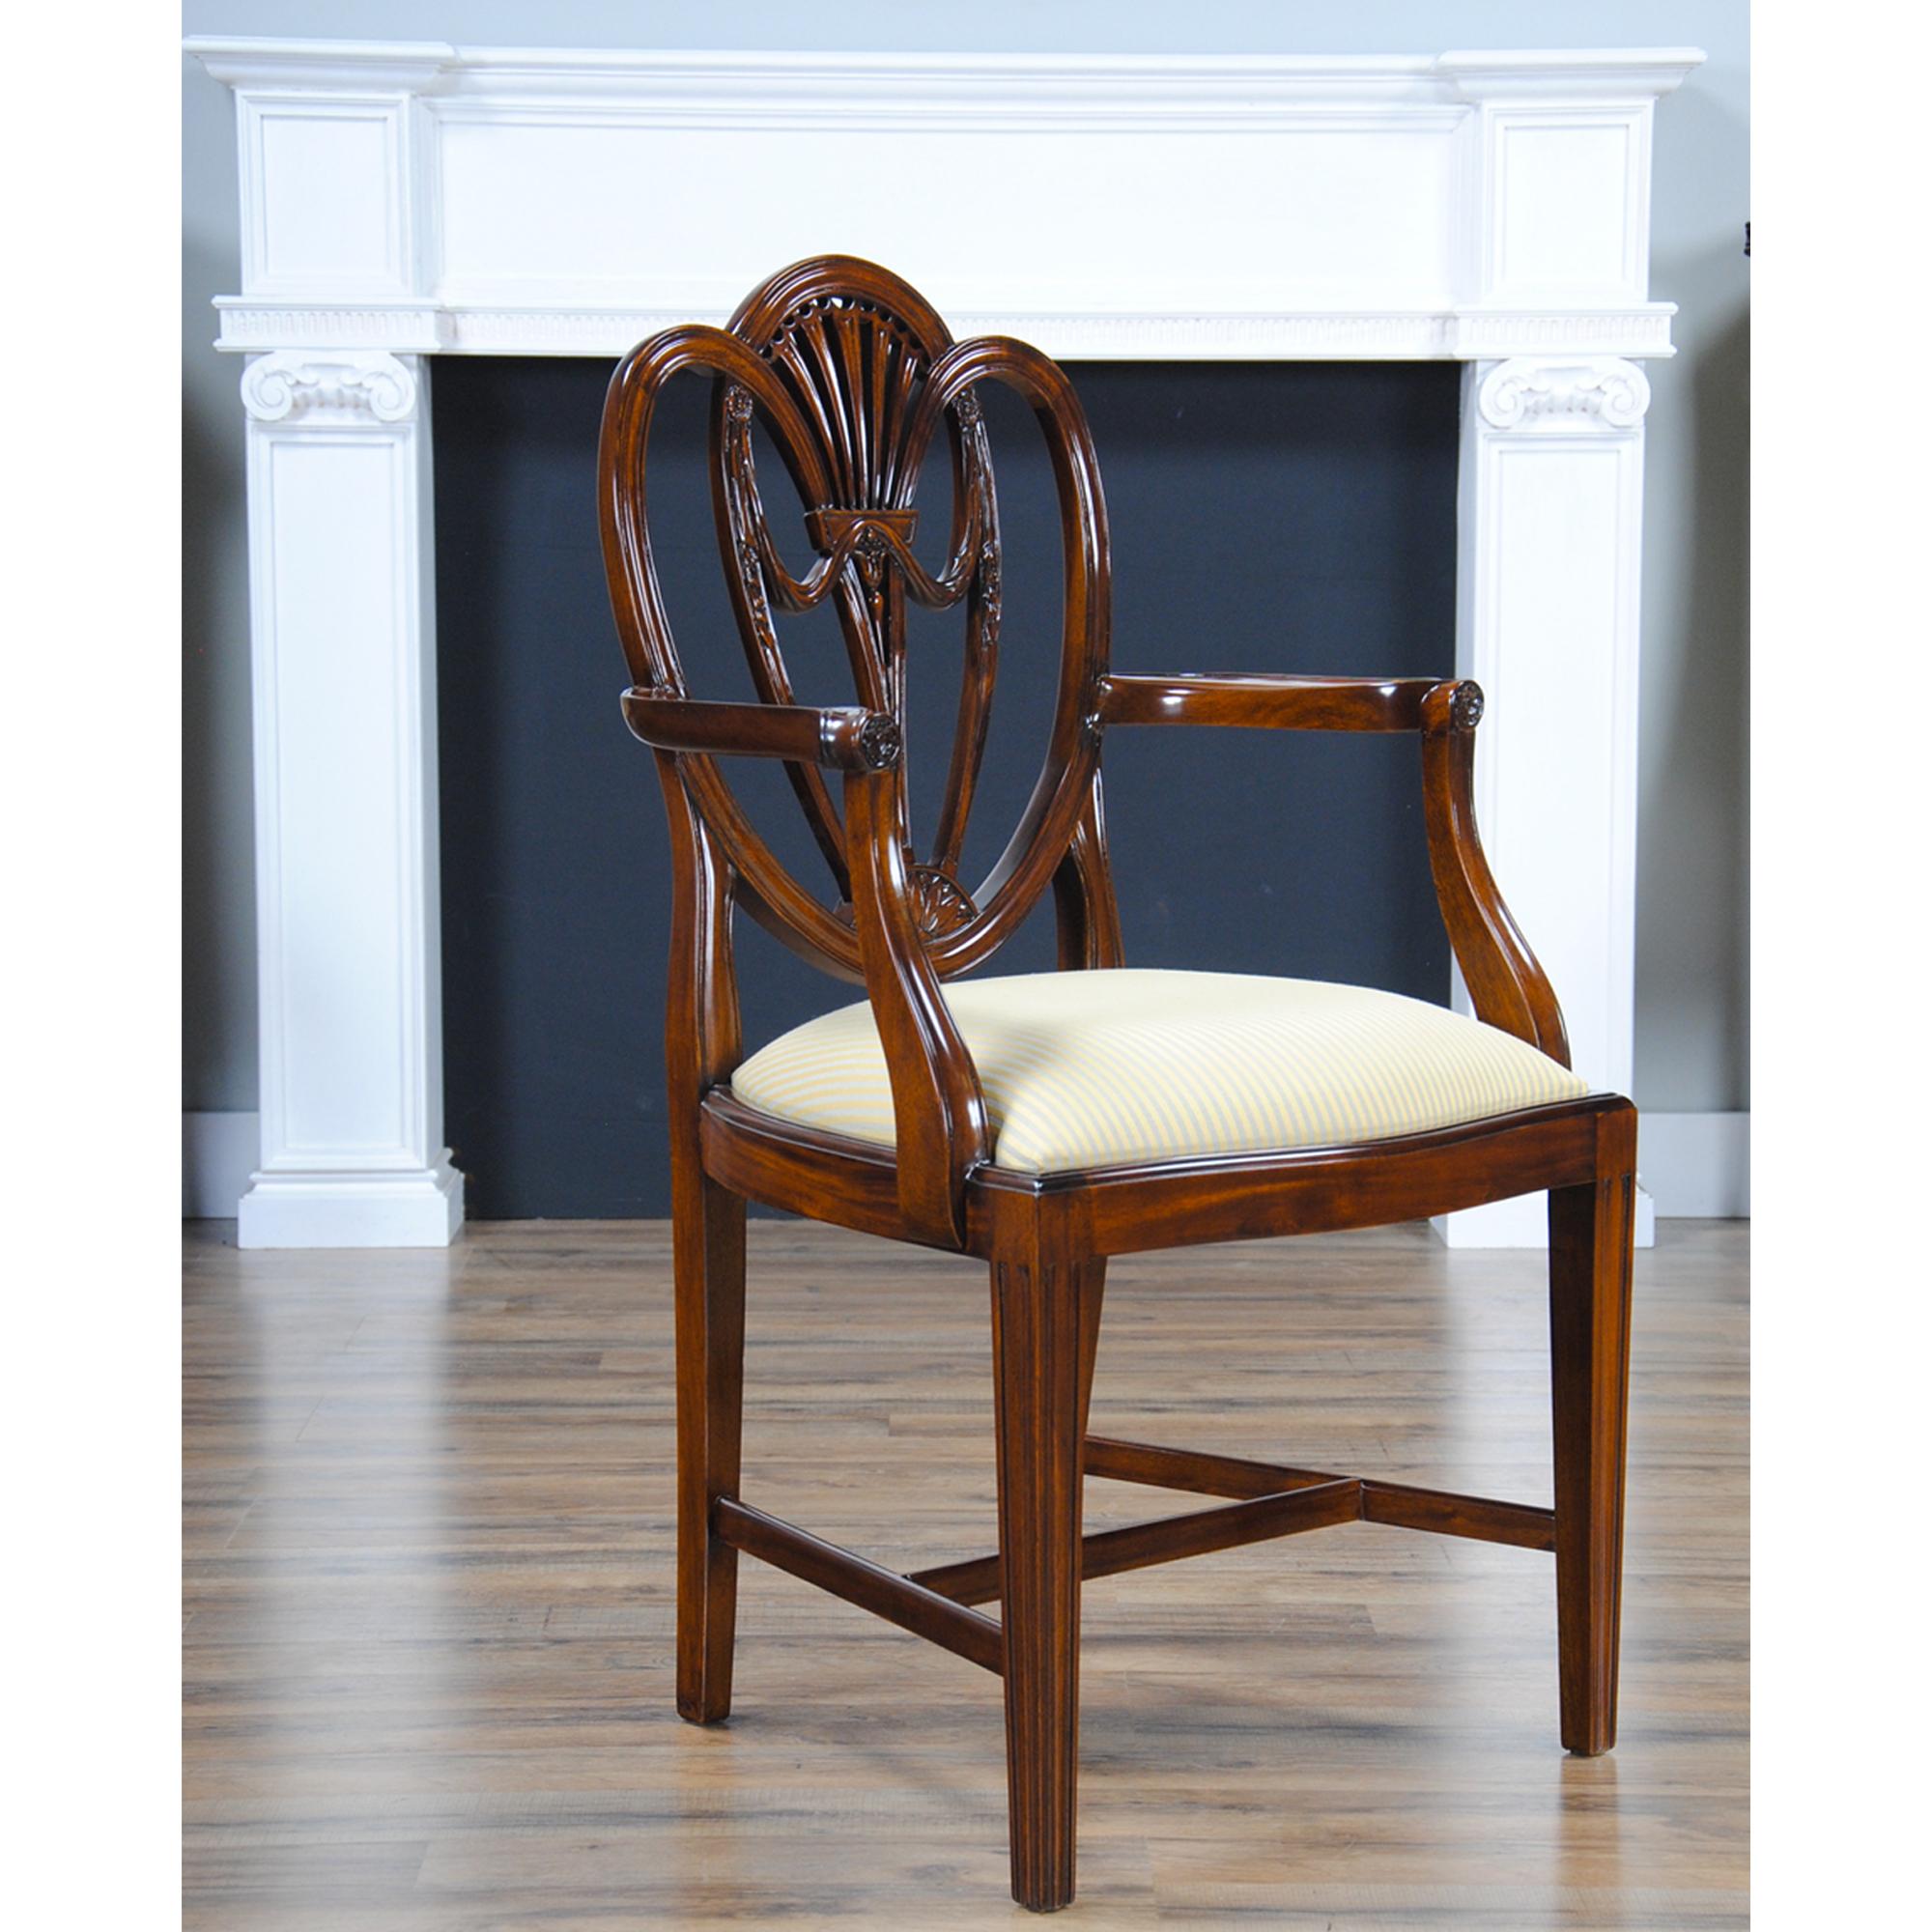 A set of ten fine quality Clover Back Dining Chairs, the set consisting of 2 arm chairs and 8 side chairs. The chairs have an elegant and stylish back featuring Drape Carvings as well as interconnected loops crested by a pierced back splat. Tapered